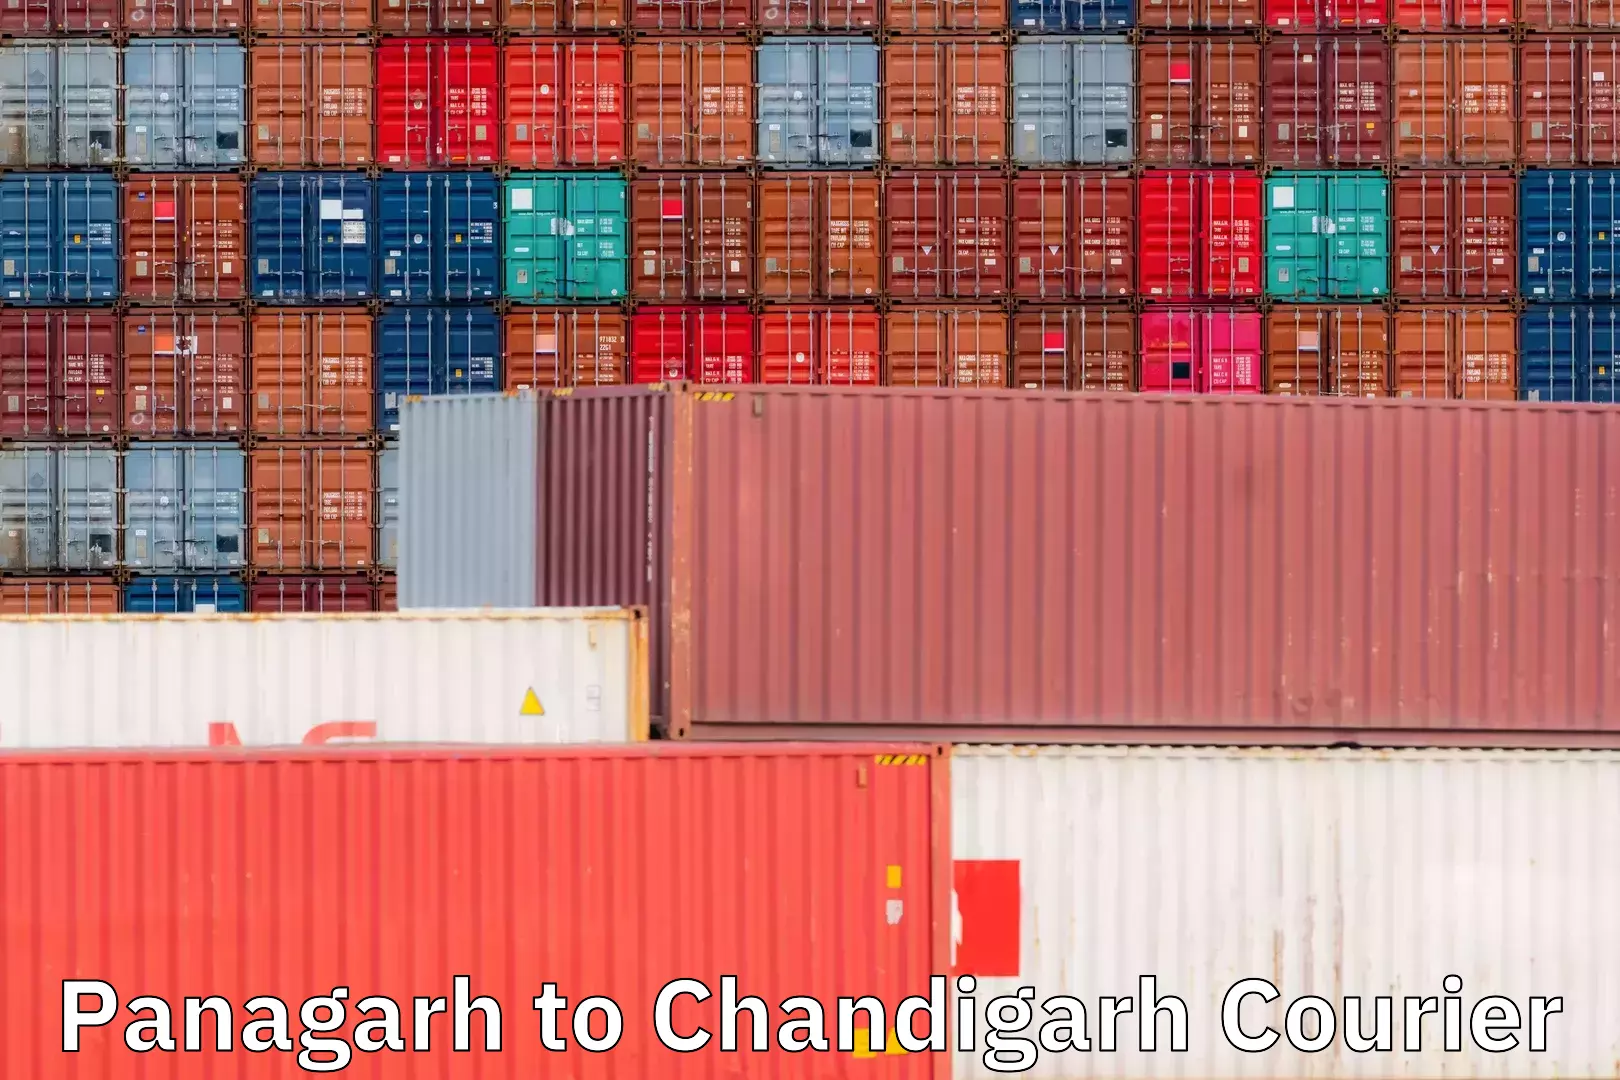 Efficient shipping operations Panagarh to Chandigarh